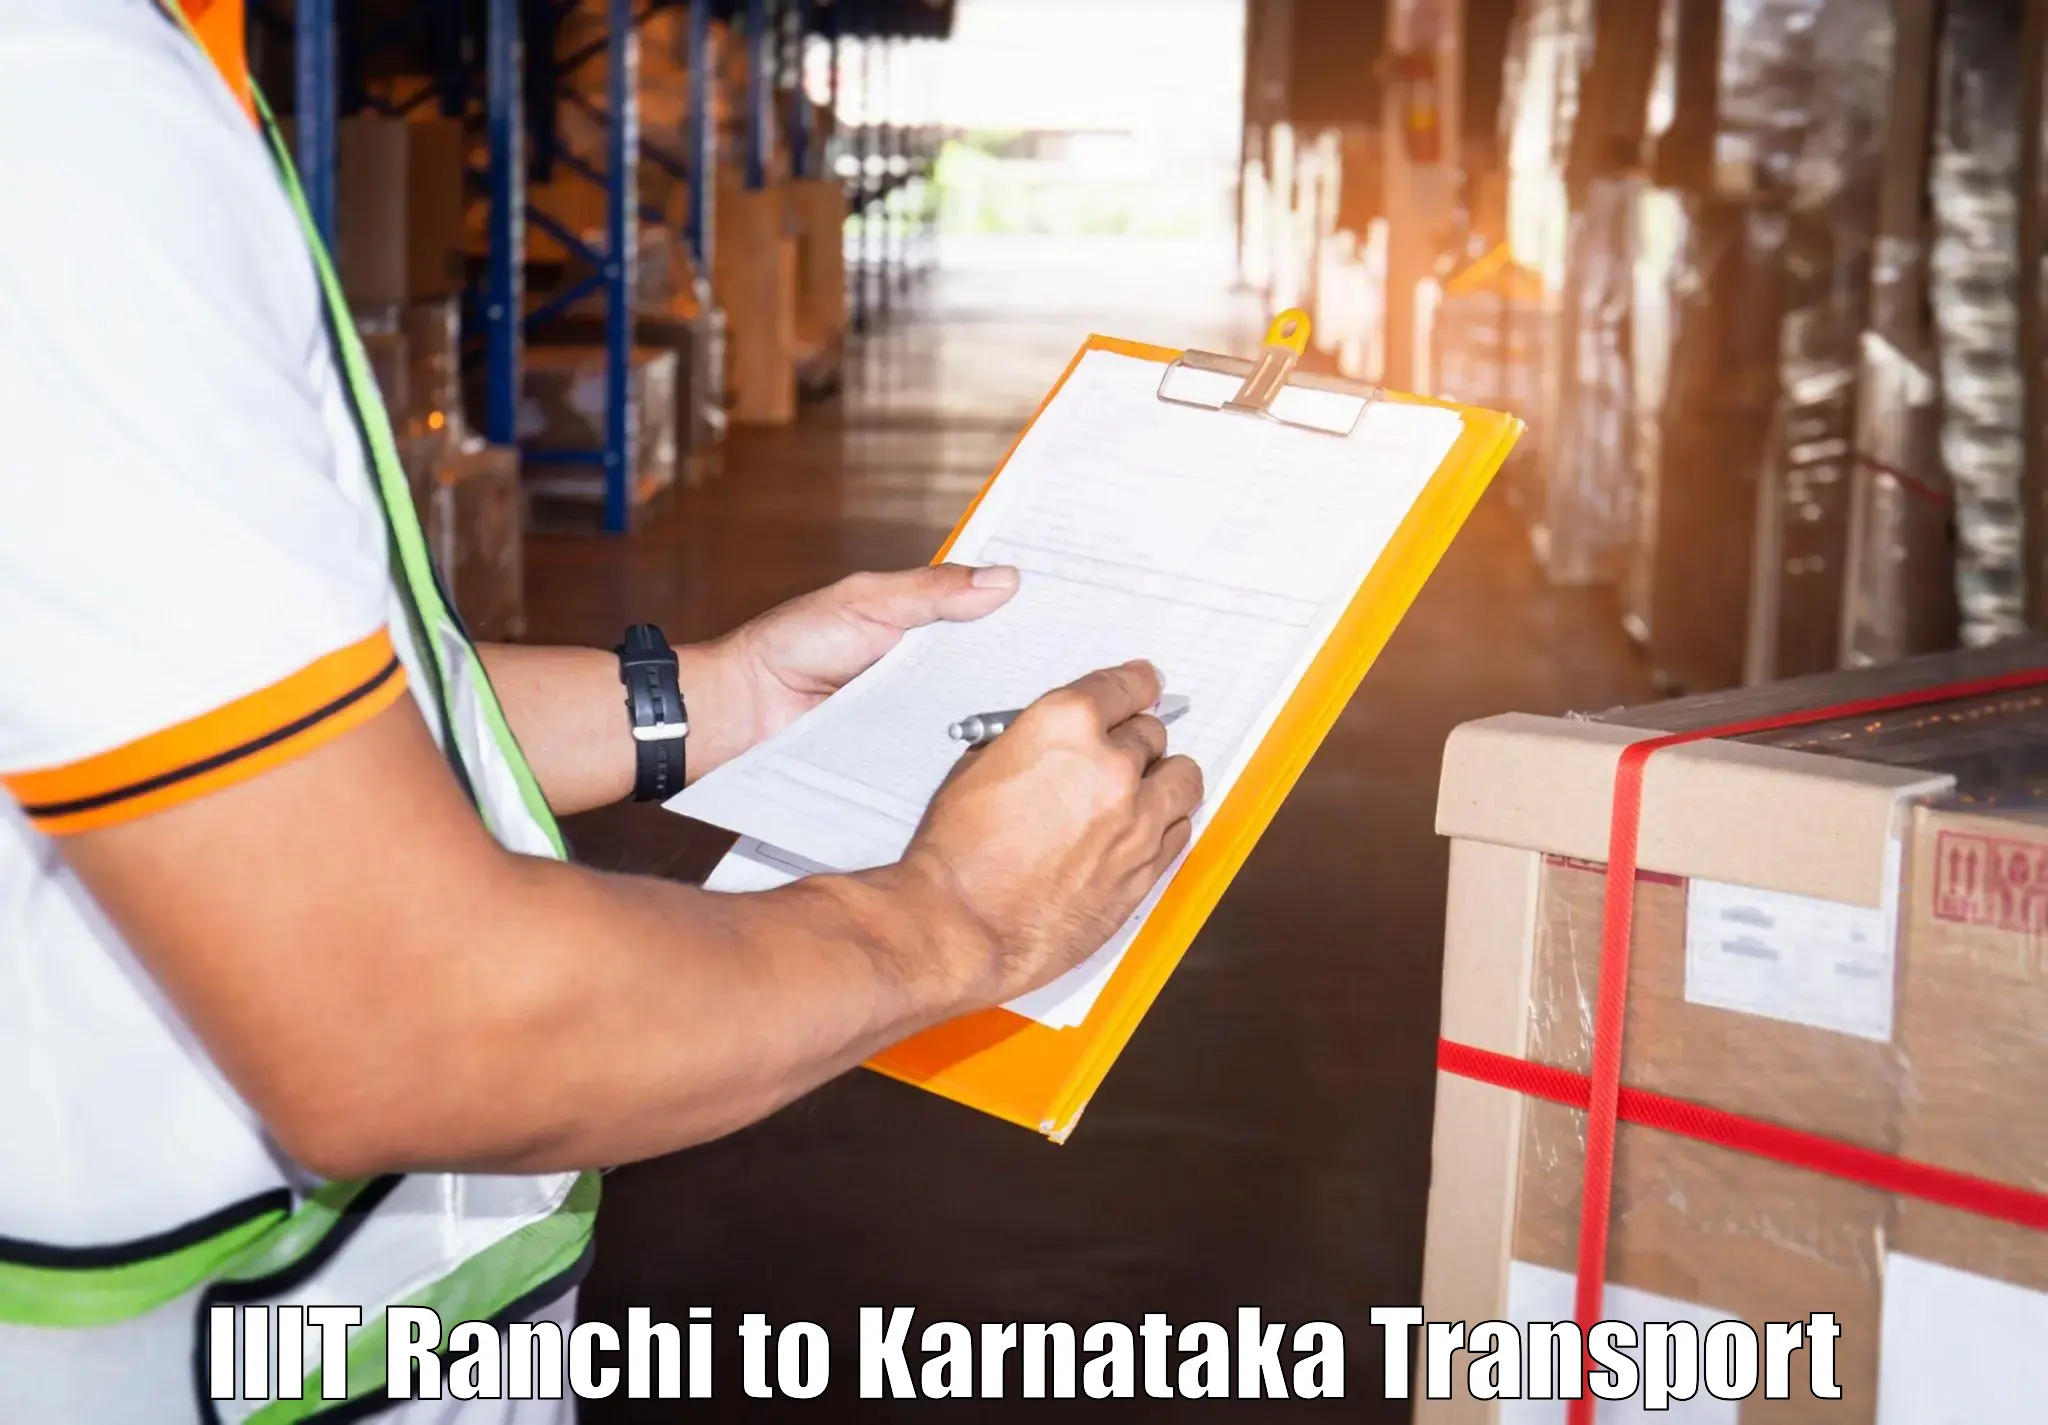 Container transport service IIIT Ranchi to Rona Gadag